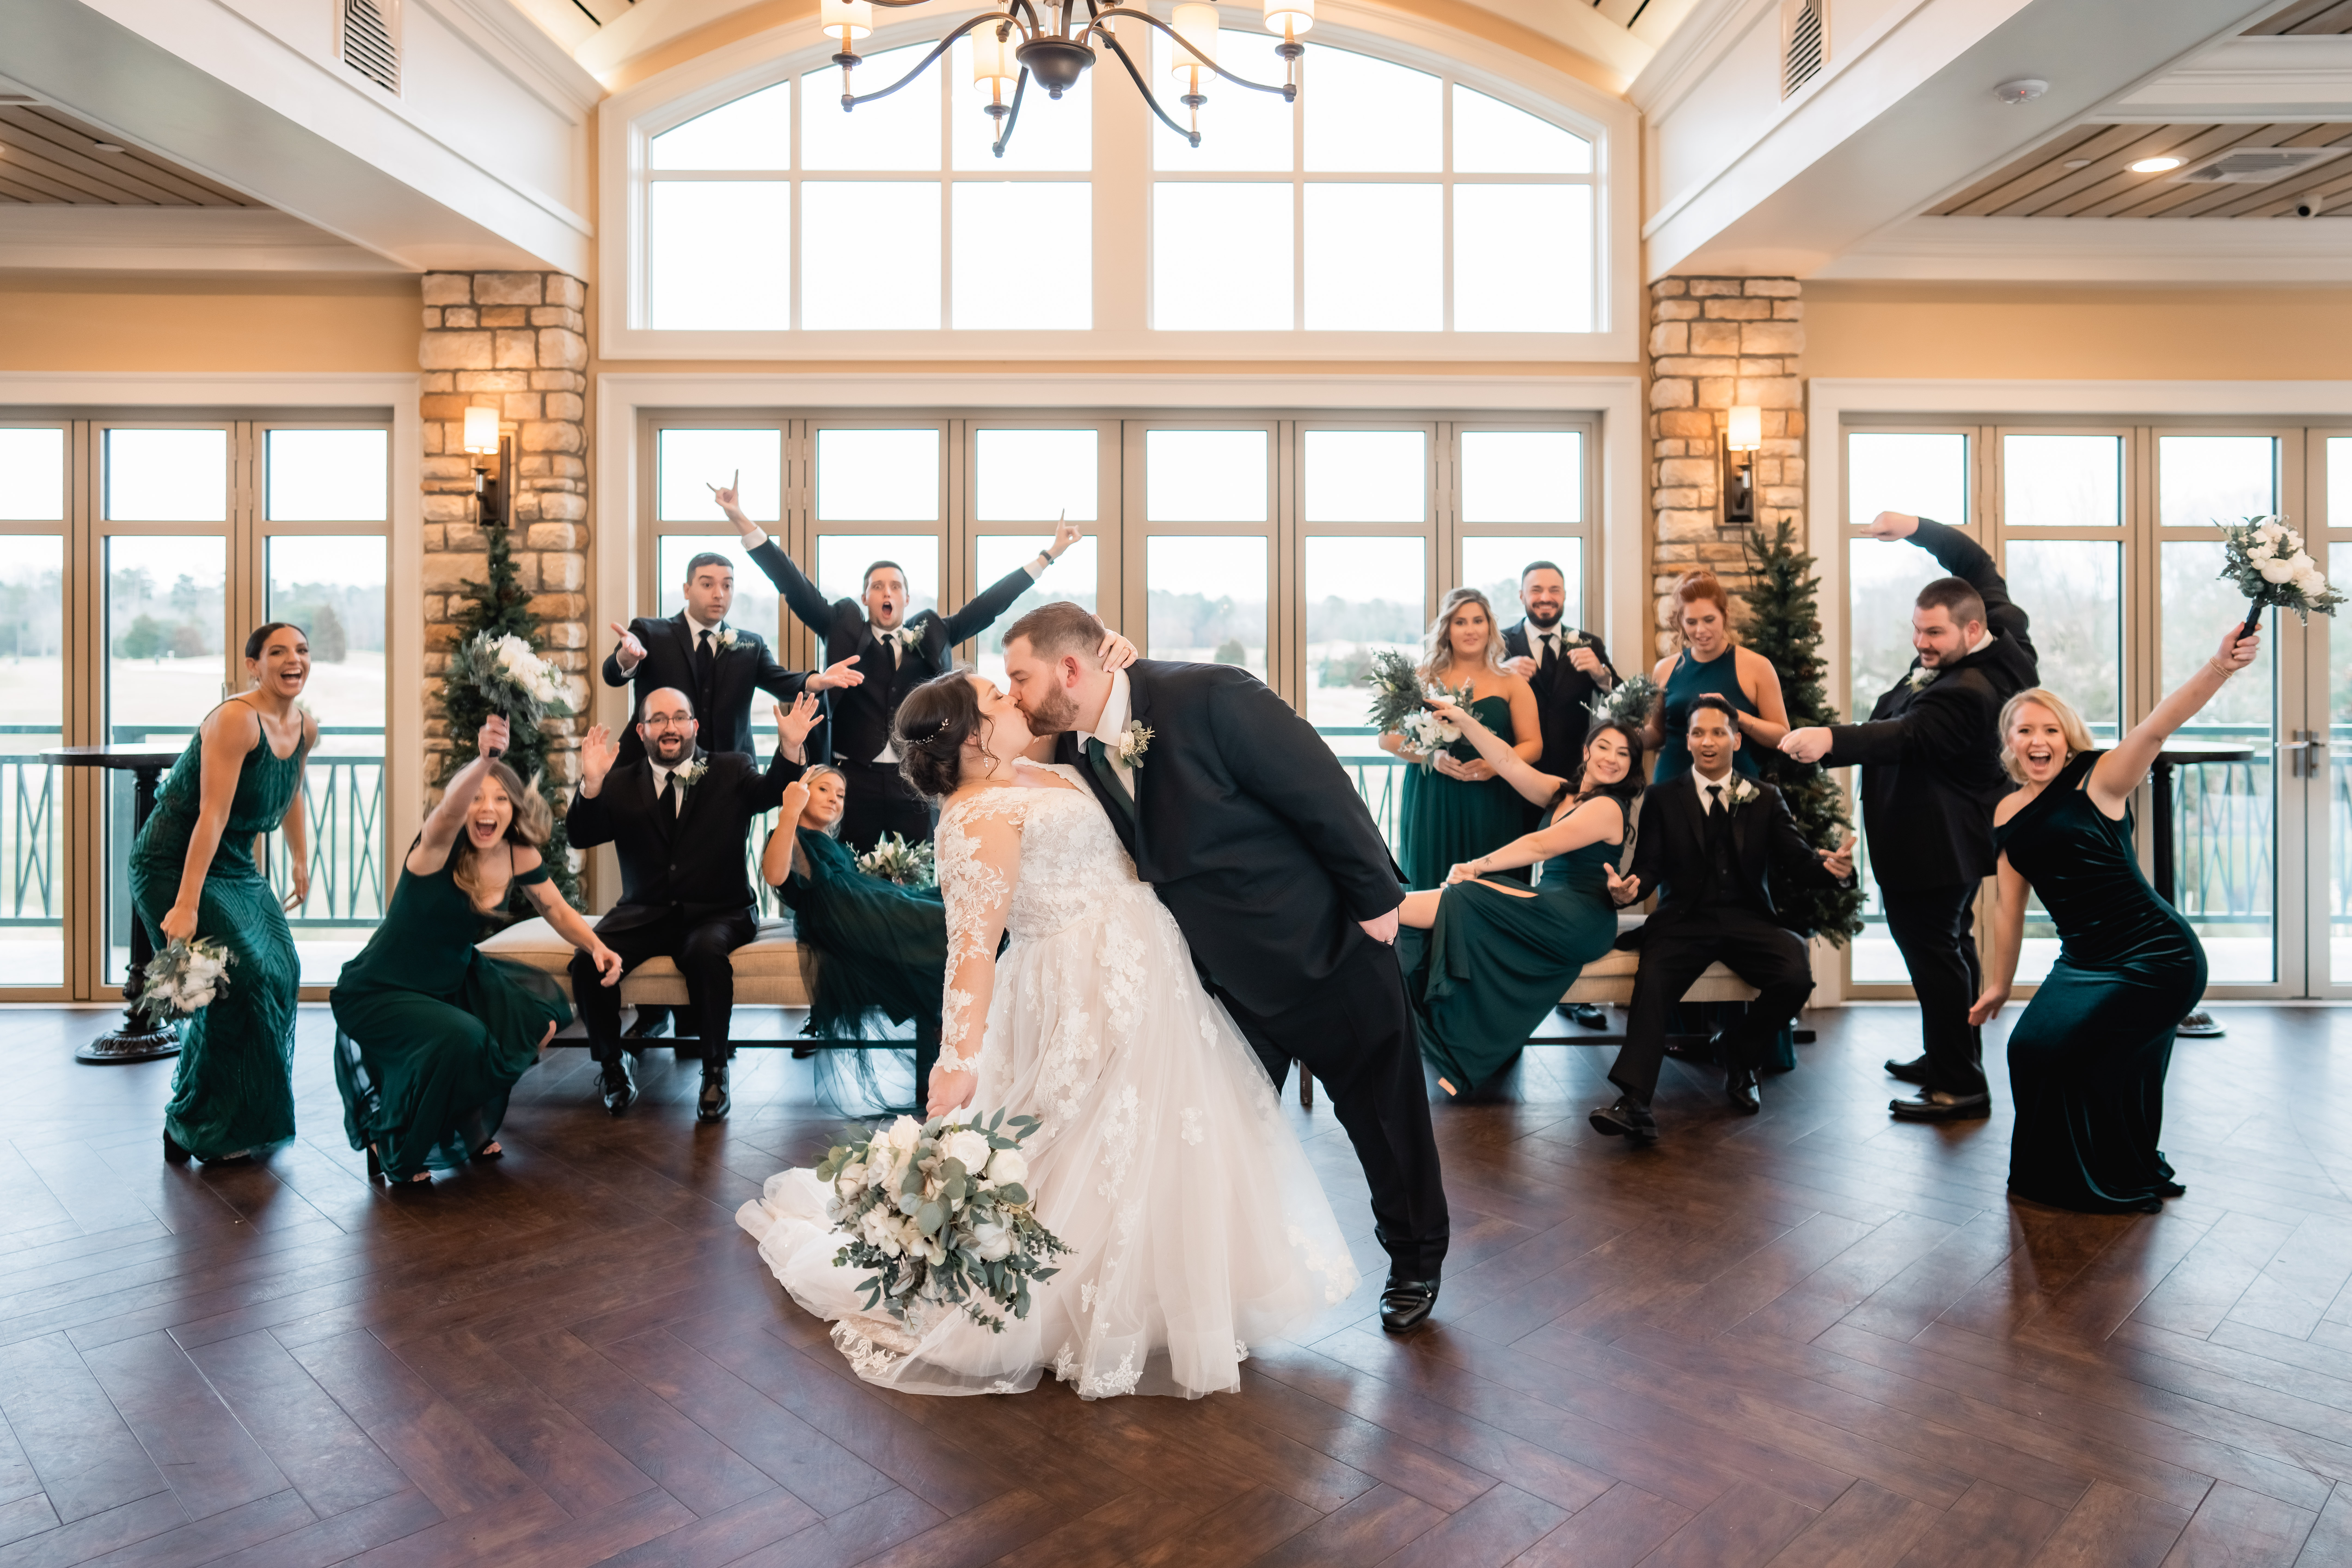 Scotland Run Golf Club Wedding, Scotland Run Gold Club Wedding Photographer, Williamstown NJ Photographer, New Jersey Wedding Photographer, NJ Winter Wedding, bride and groom kissing while surrounded by their bridal party cheering and posing for their winter wedding 